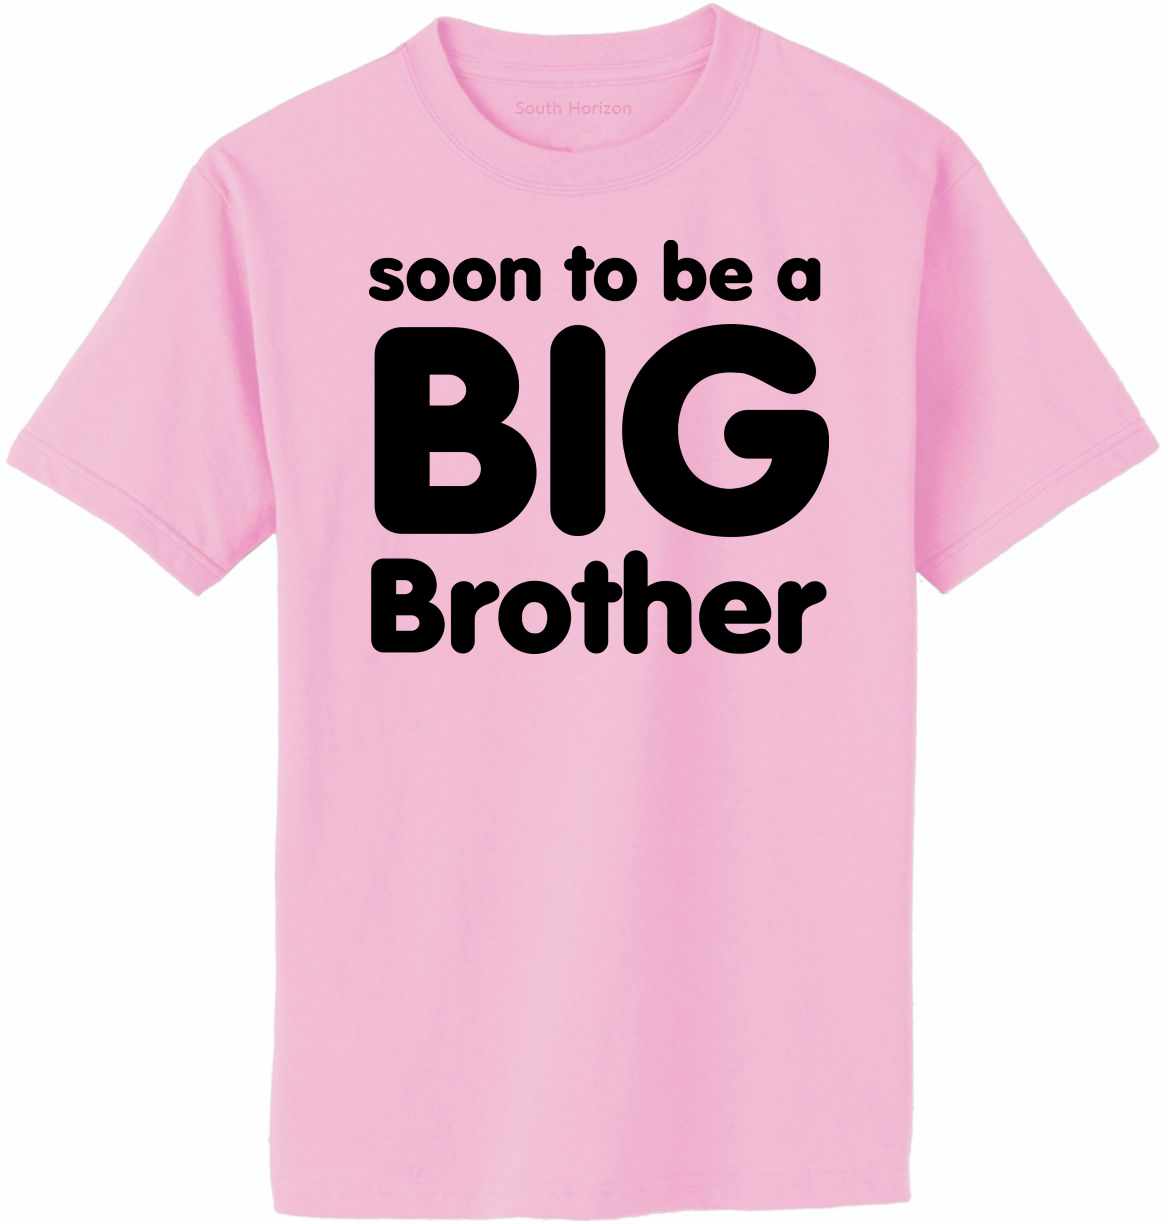 Soon to be a BIG BROTHER Adult T-Shirt (#590-1)